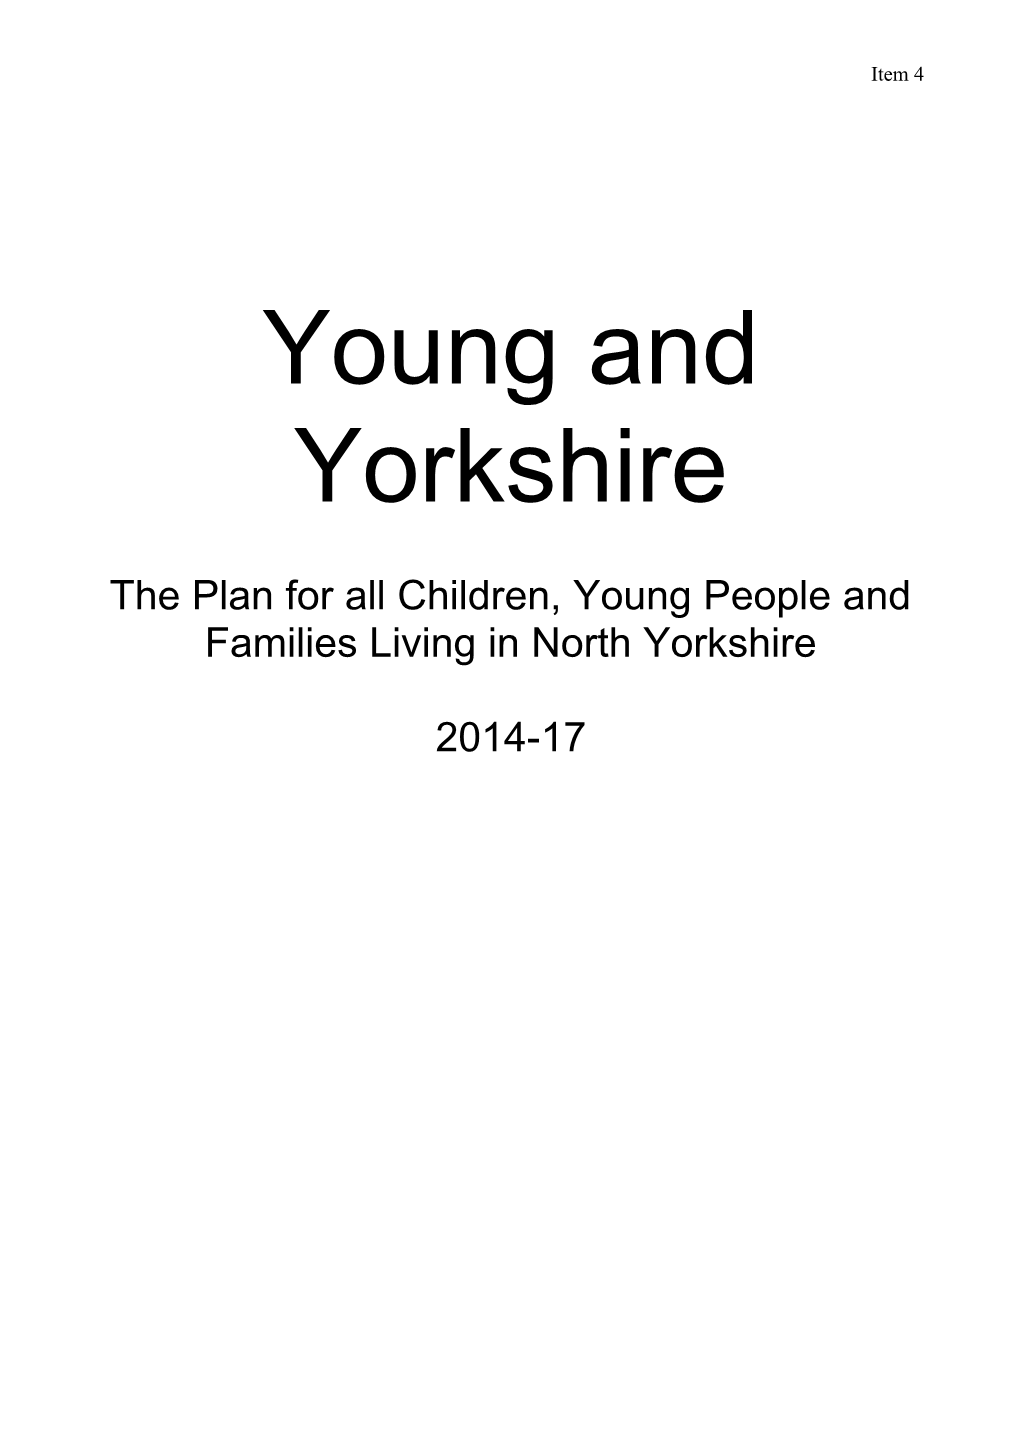 The Plan for All Children, Young People and Families Living in North Yorkshire